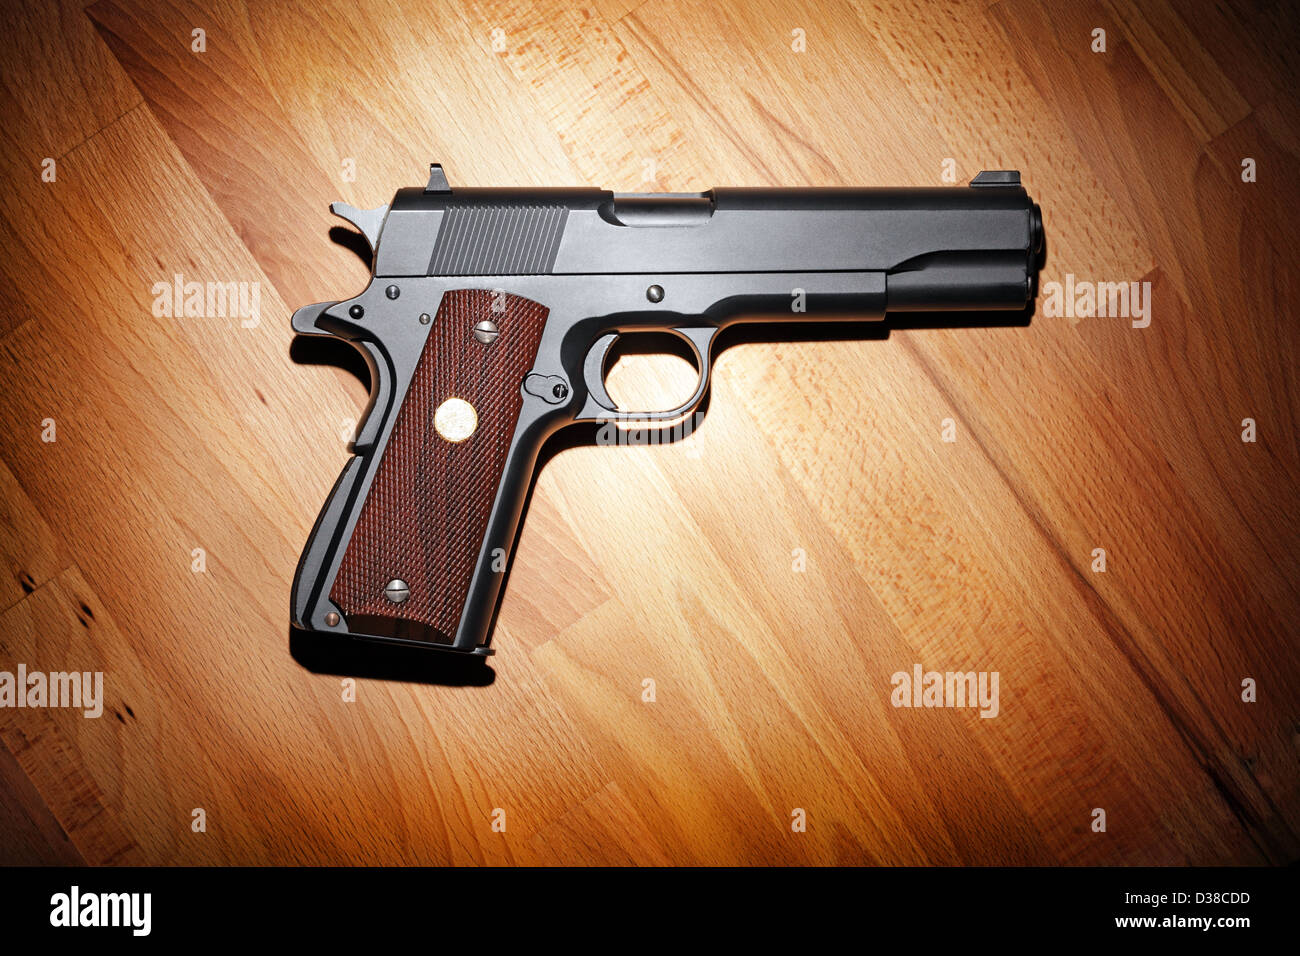 Semi-automatic M1911 Mark IV Series 80 .45 caliber pistol on the wooden table. Stock Photo